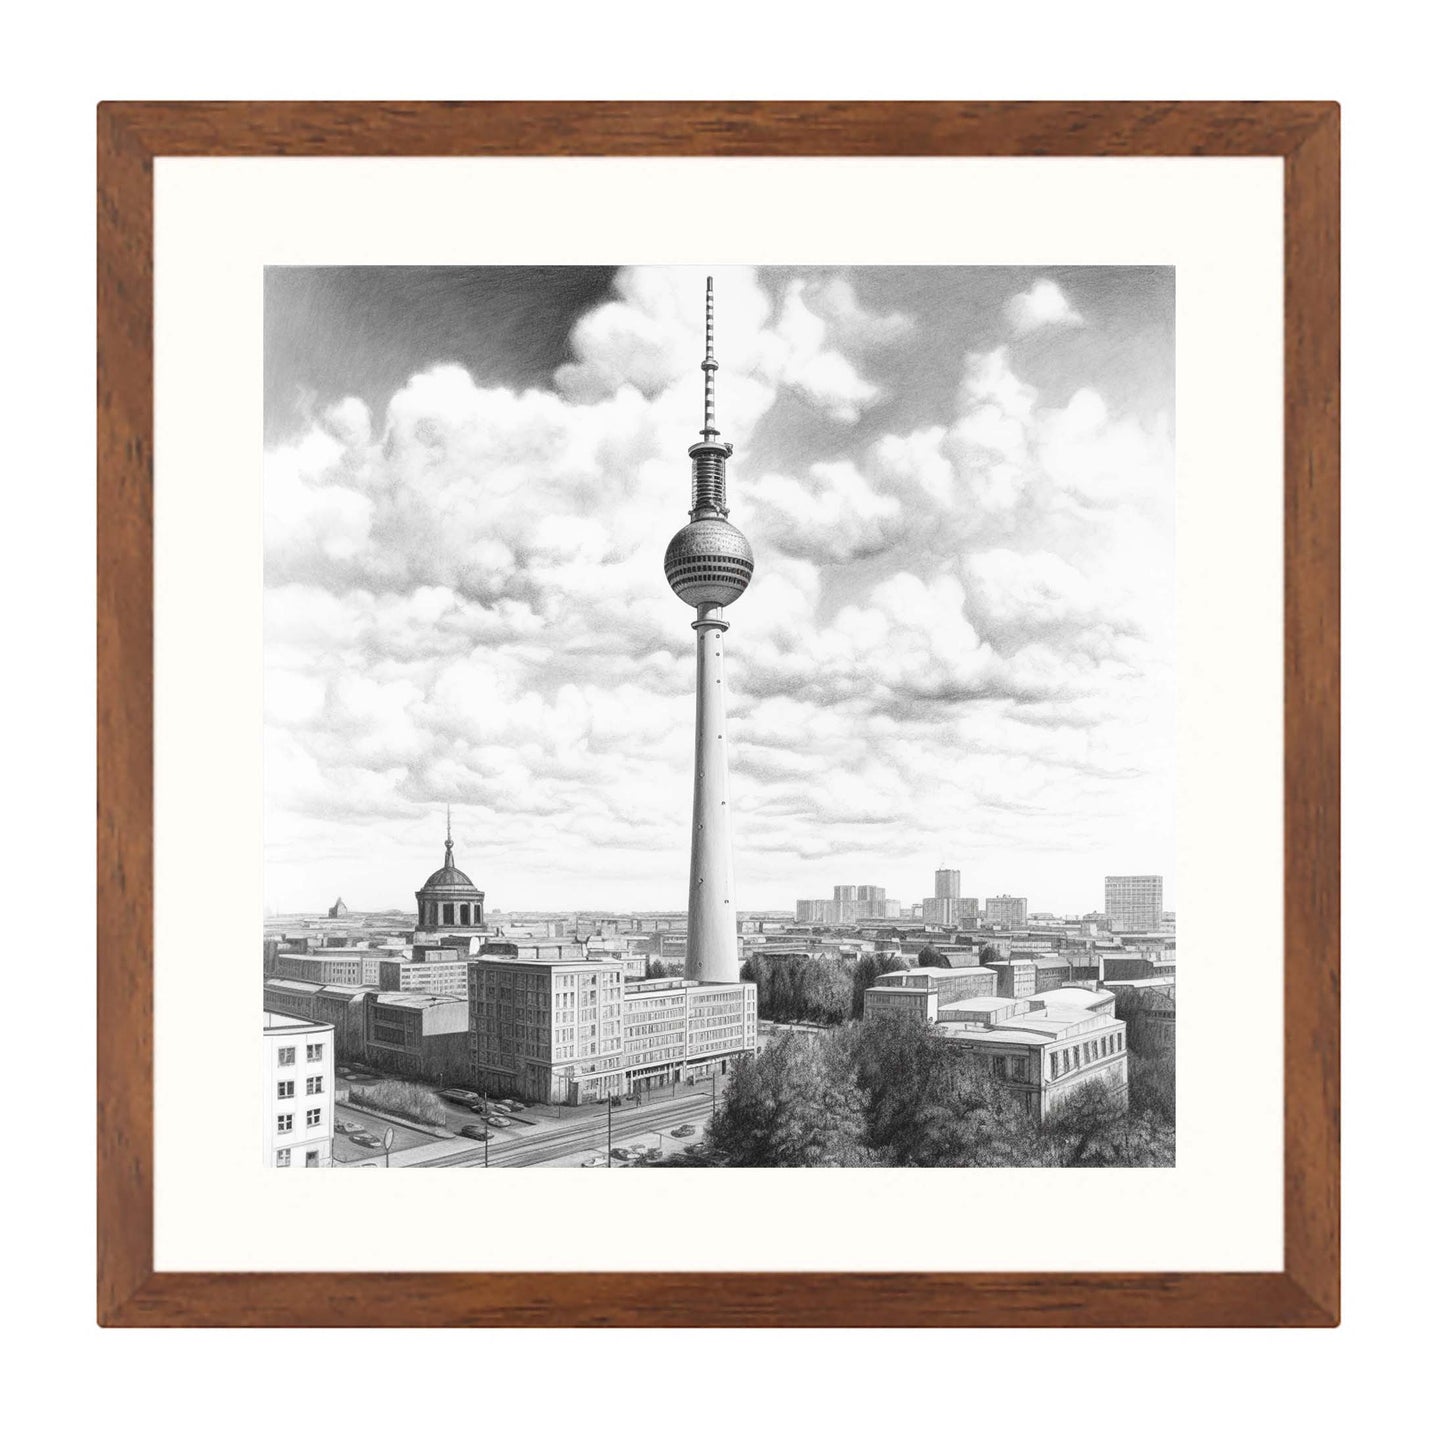 Berlin TV tower - mural in the style of a drawing